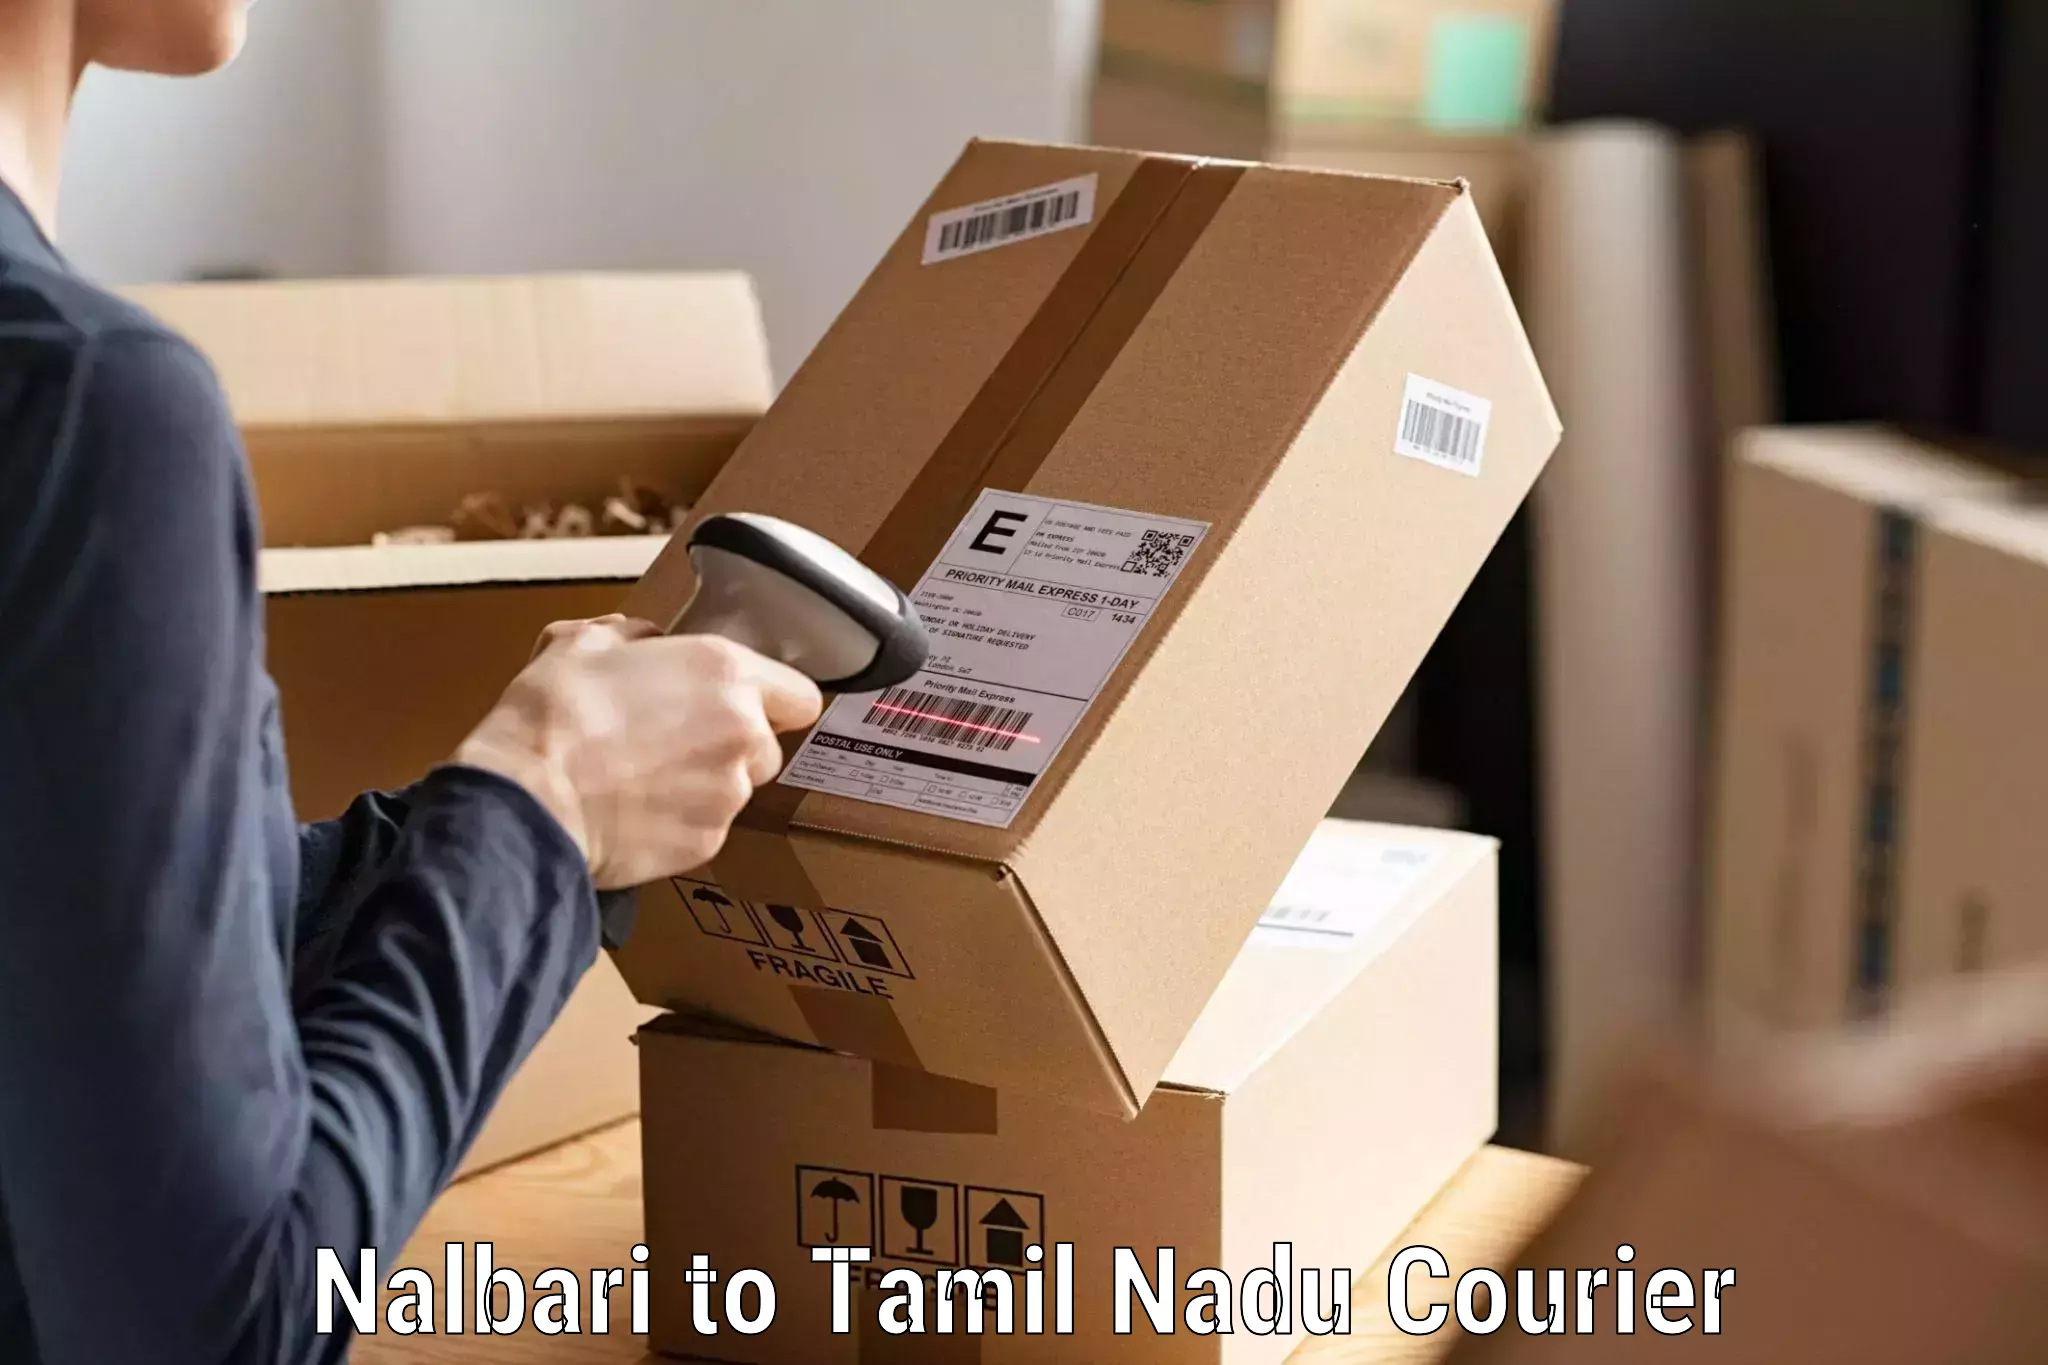 Nationwide shipping services Nalbari to Melur